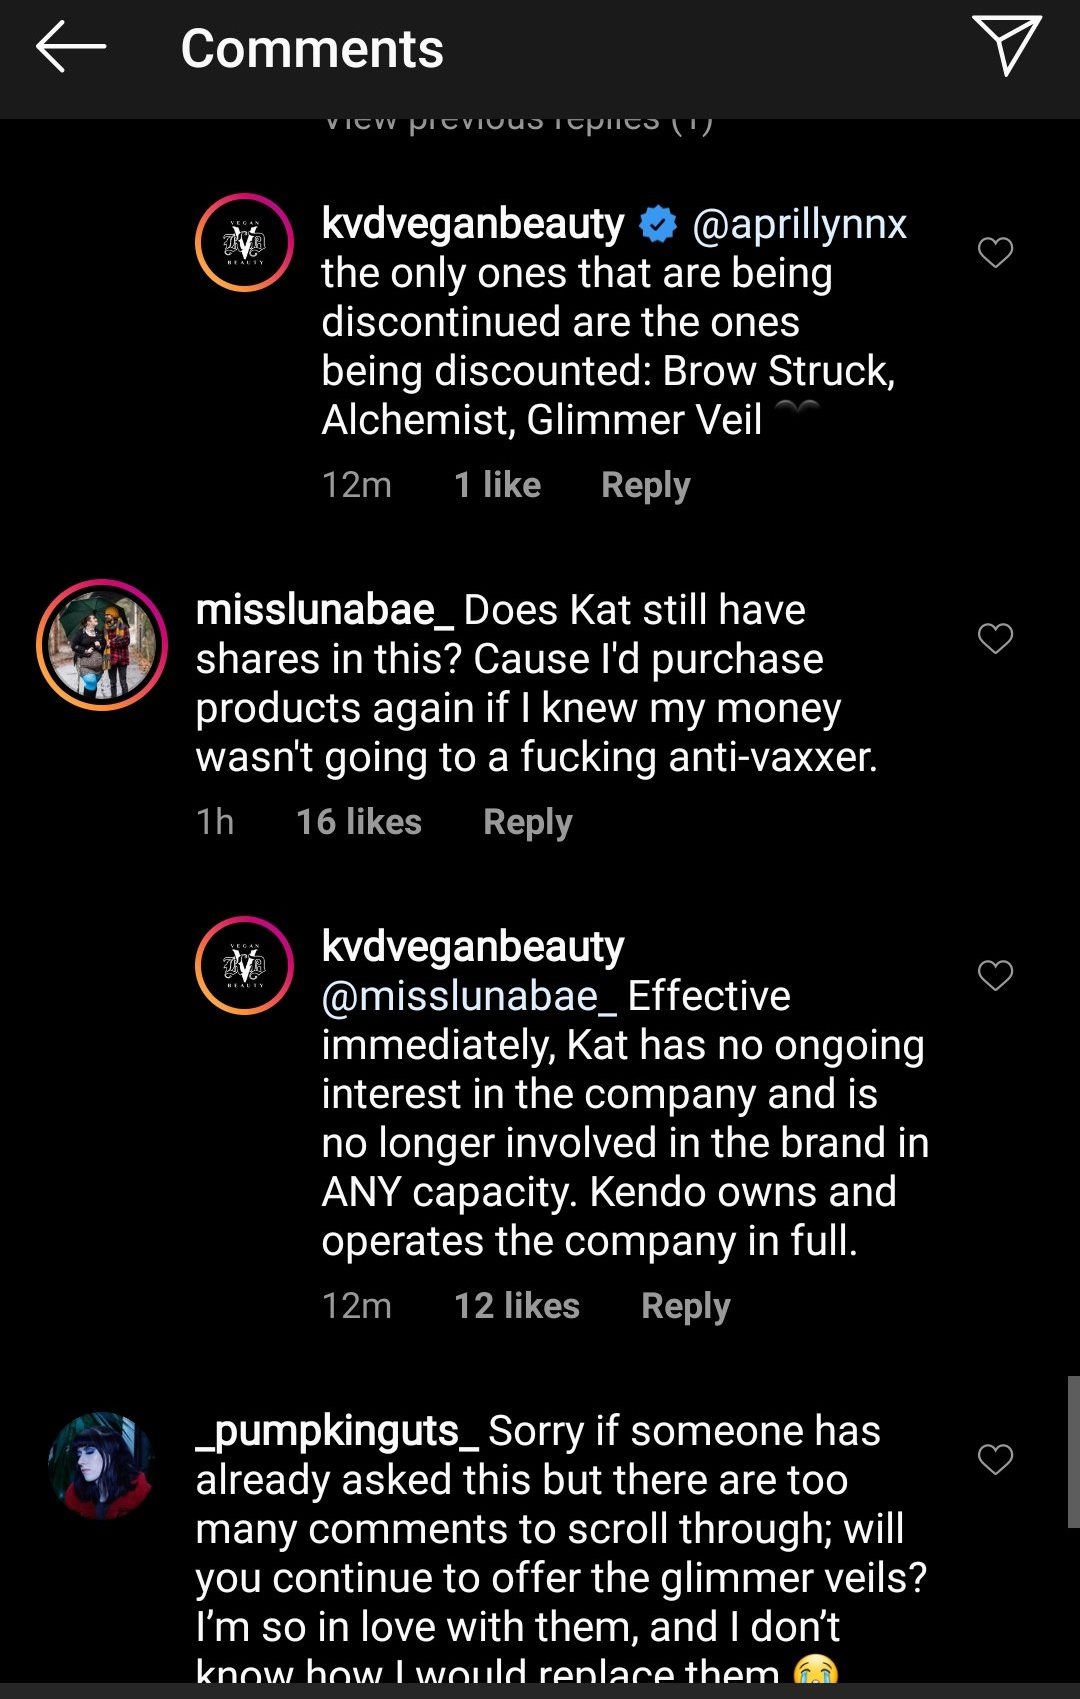 The brand kvd vegan beauty unfolowed her on social media and she unfolowed the brand on their social media.  kat von d beauty. she must have really touched some nerves there since the brand is even responding to comments that contain strong language and cursing words that are directed towards kat von d